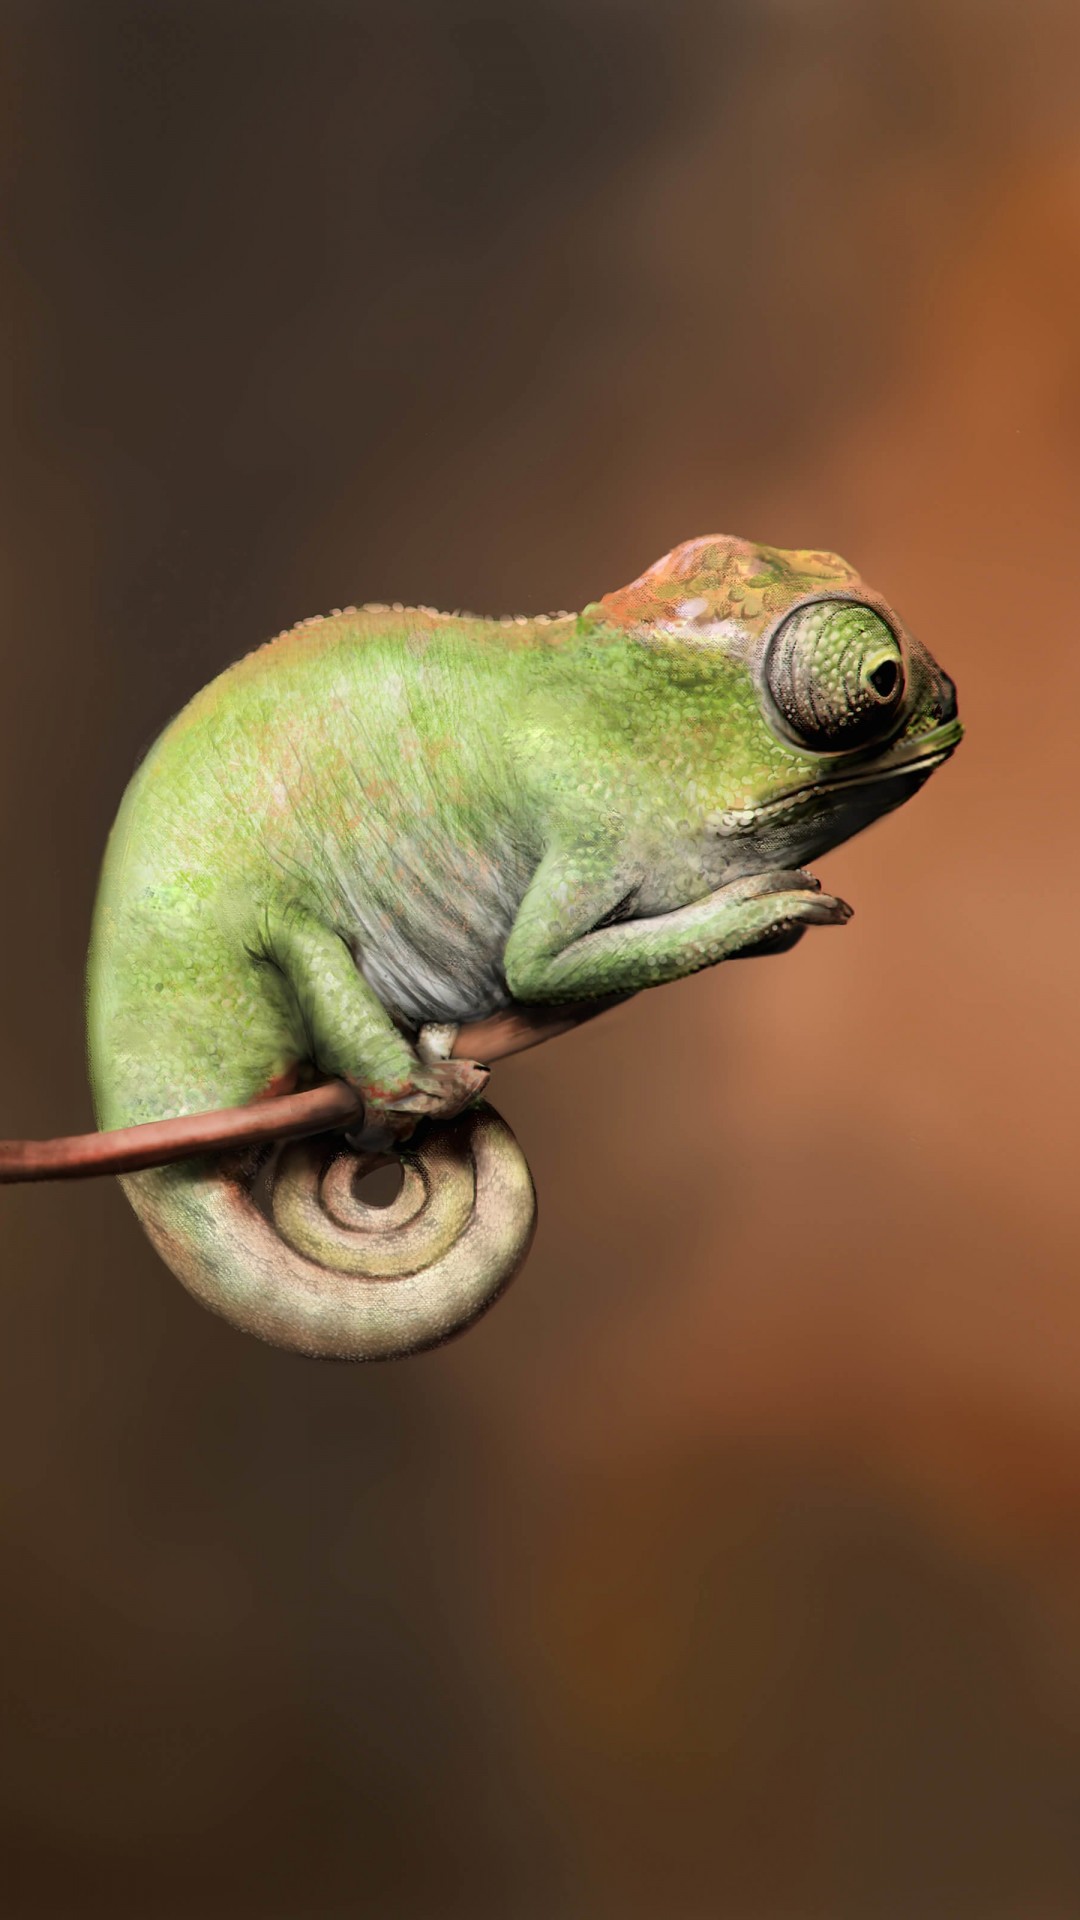 Baby Chameleon Perching On a Twisted Branch Wallpaper for SONY Xperia Z1